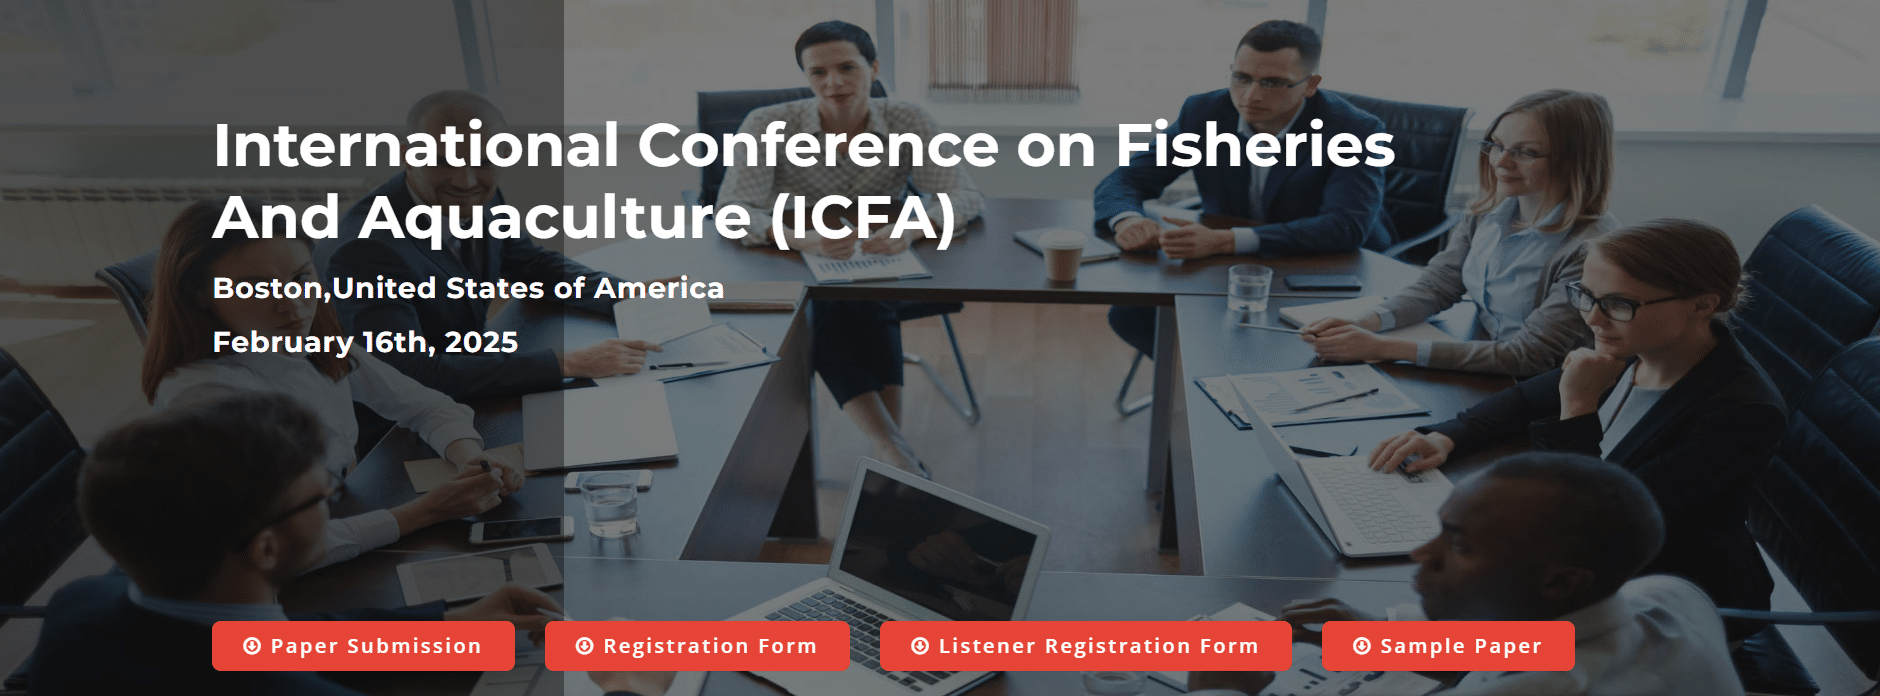 International Conference on Fisheries And Aquaculture (ICFA)